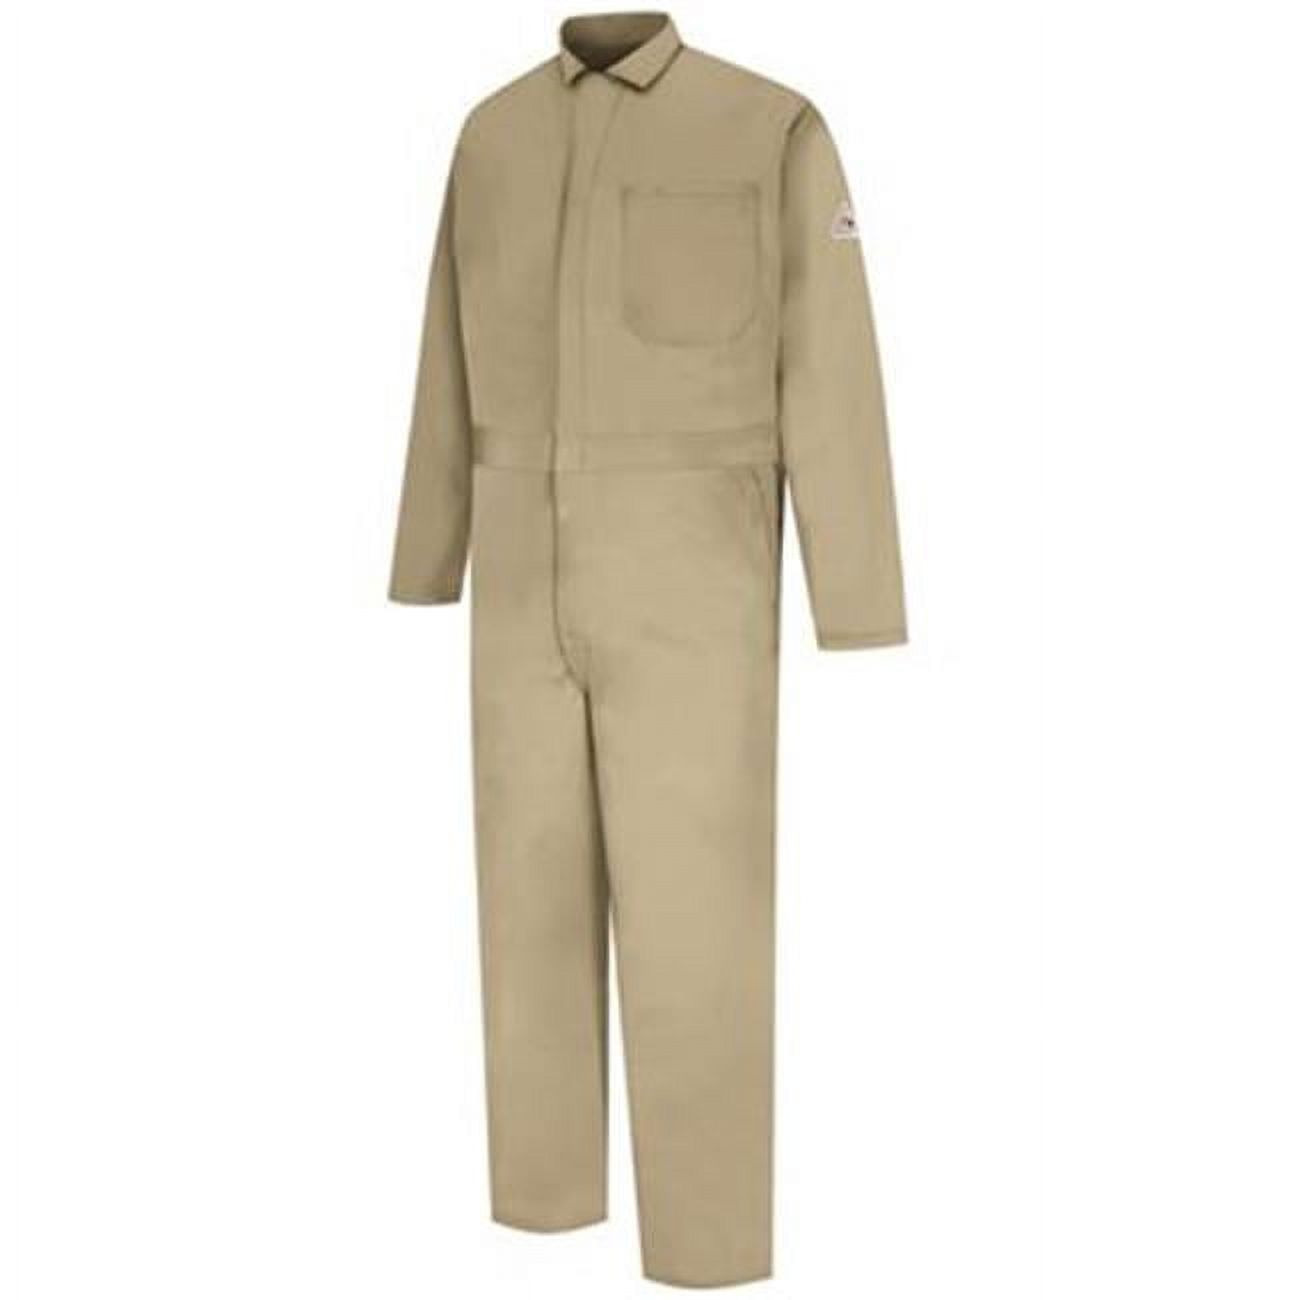 Bulwark 52'' Khaki Cotton Flame Resistant Coverall With Zipper Closure - image 1 of 2